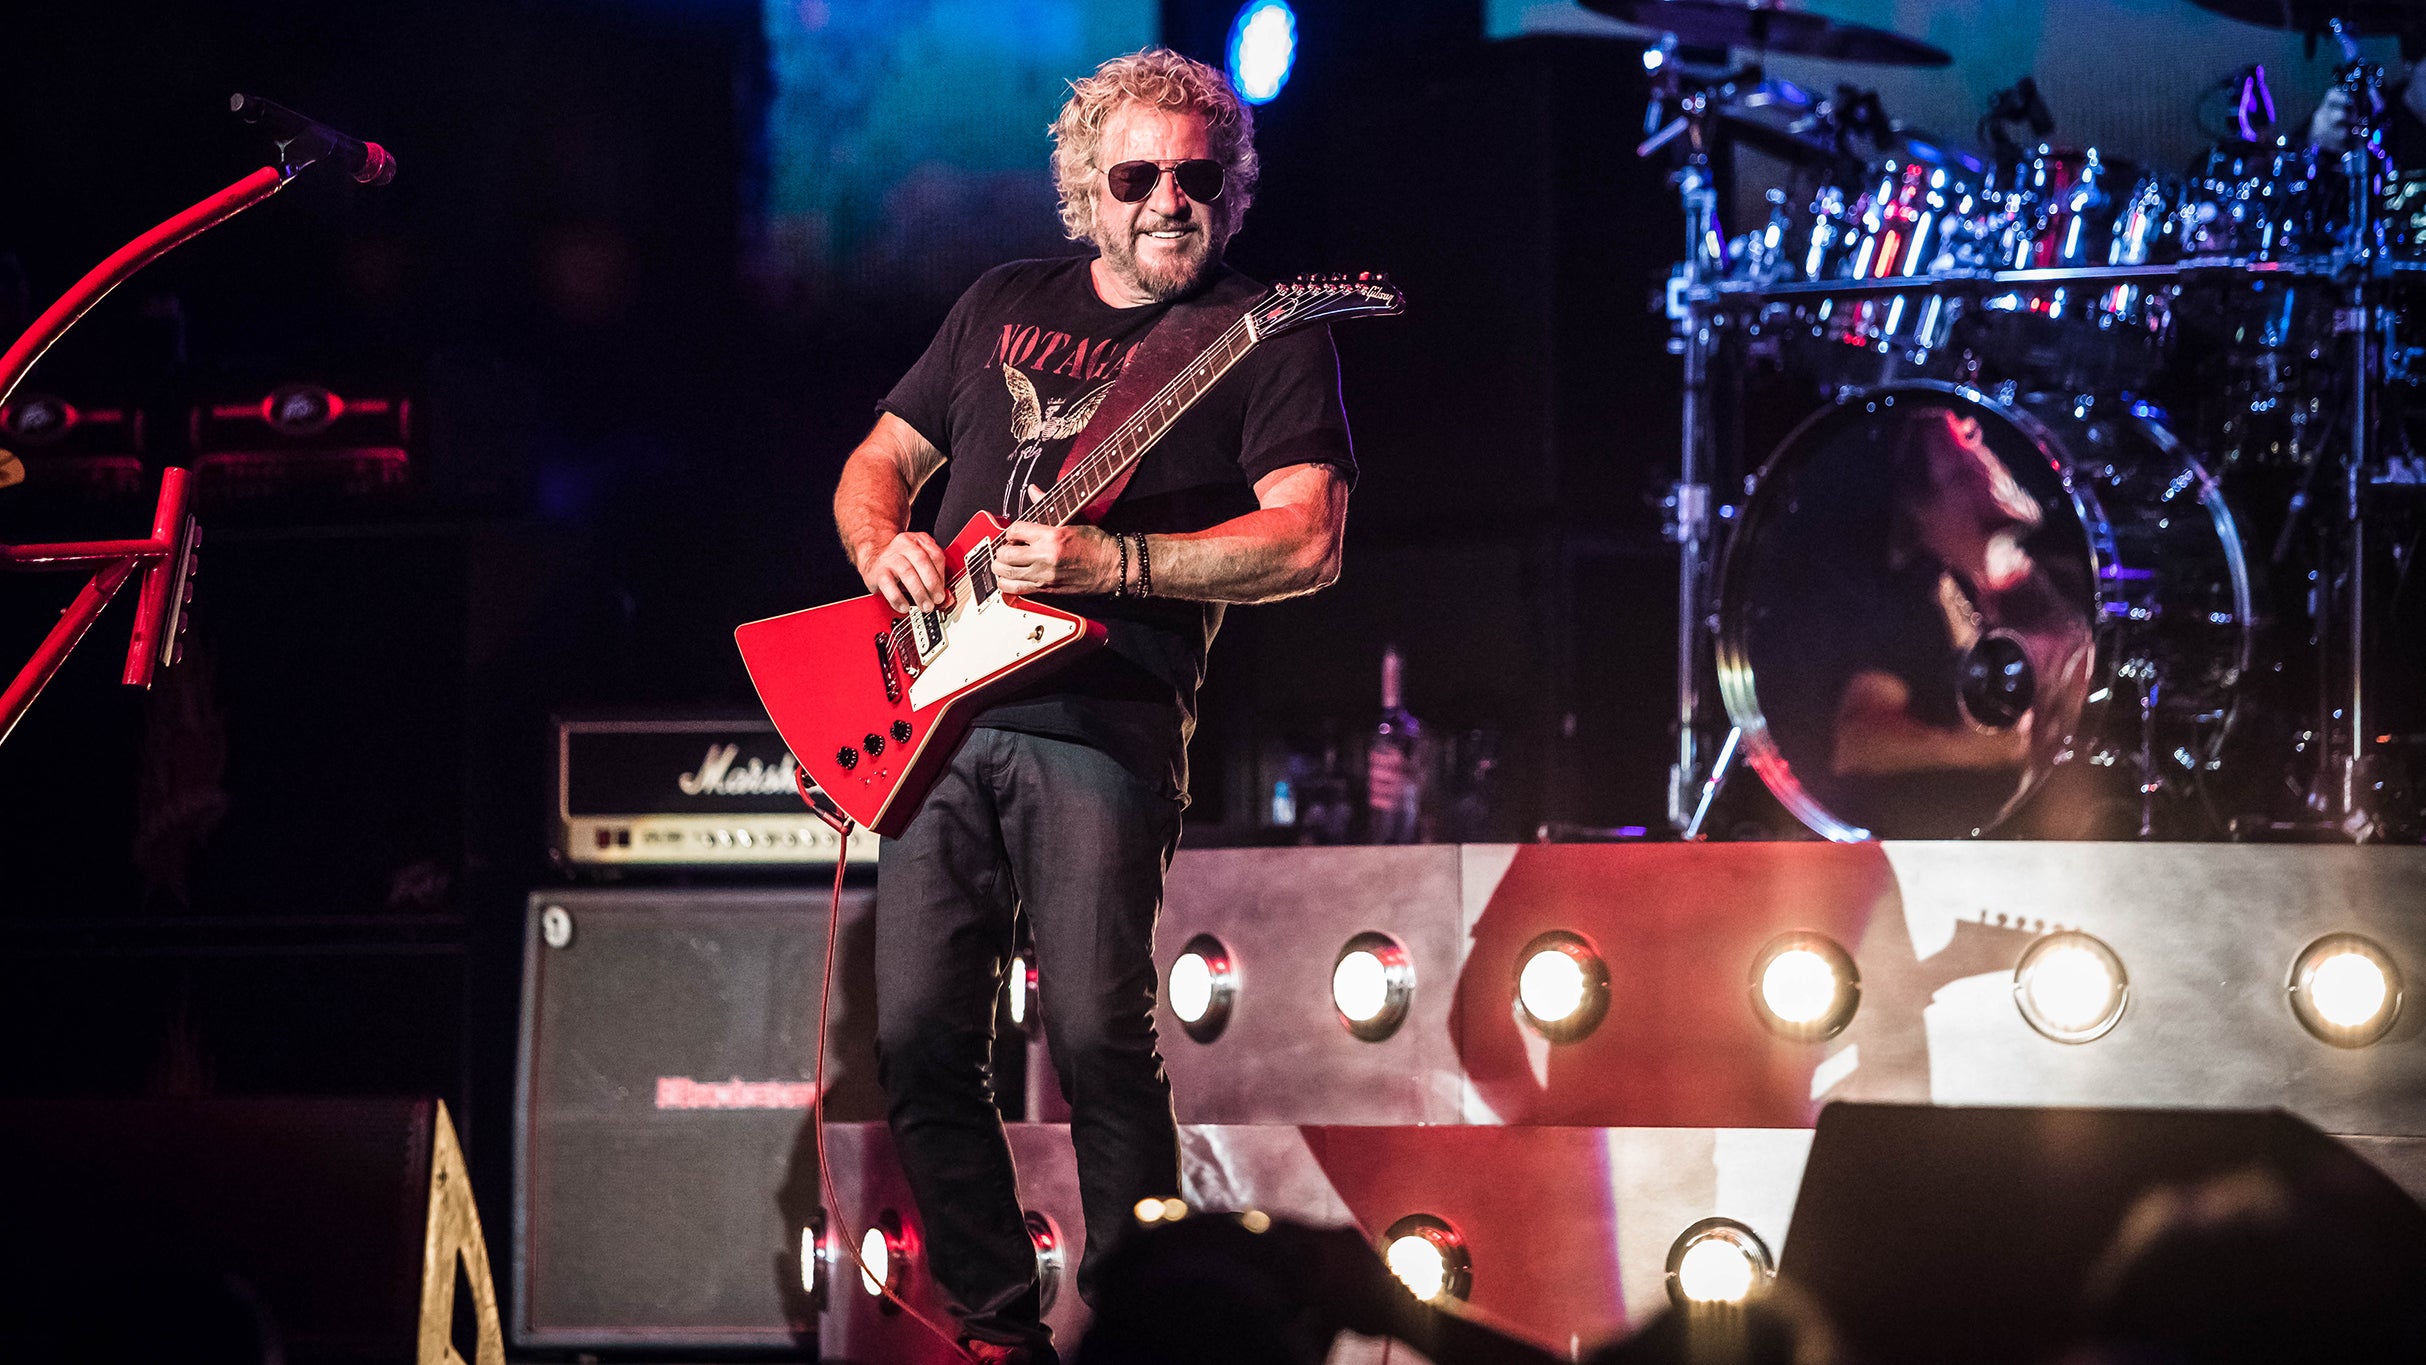 SAMMY HAGAR The Best of All Worlds Tour with special guest Loverboy in Dallas promo photo for Official Platinum Onsale presale offer code